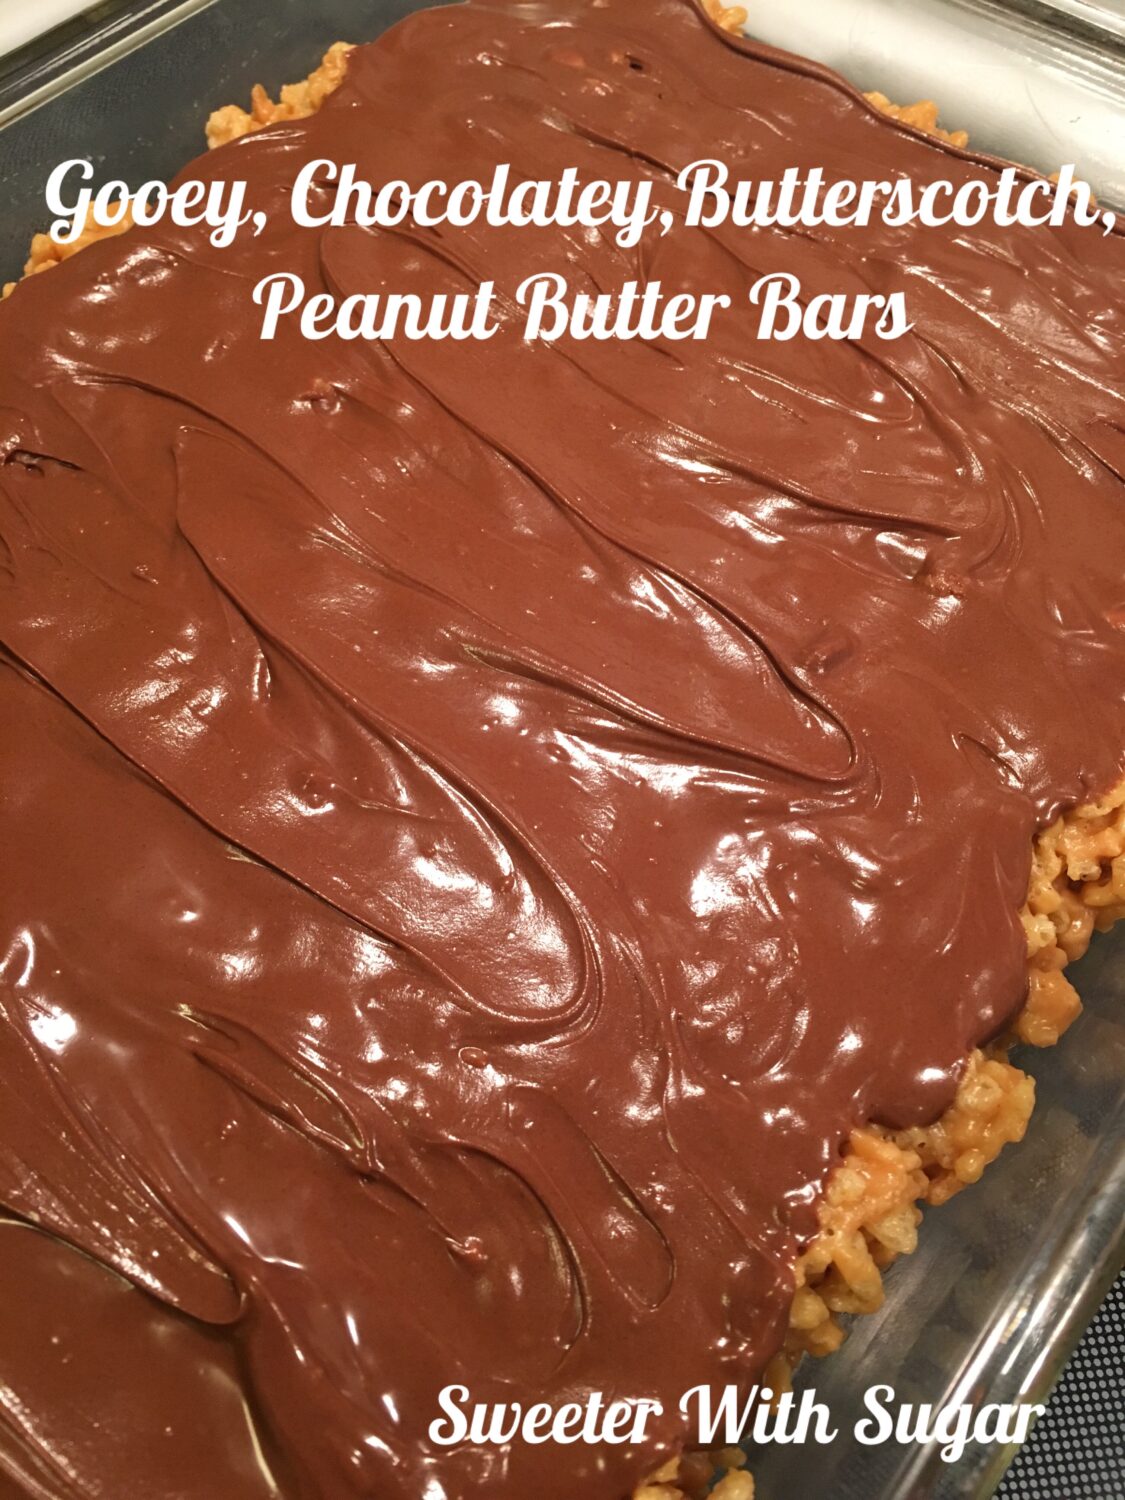 The Best Baby Ruth Bars (Scotcharoos) | Sweeter With Sugar | A simple and delicious treat or dessert the whole family will love. Snack Recipes, Peanut Butter, Rice Krispies, Butterscotch, Chocolate, #Dessert #Butterscotch #Chocolate #PeanutButter #Simple #Treats #Bars